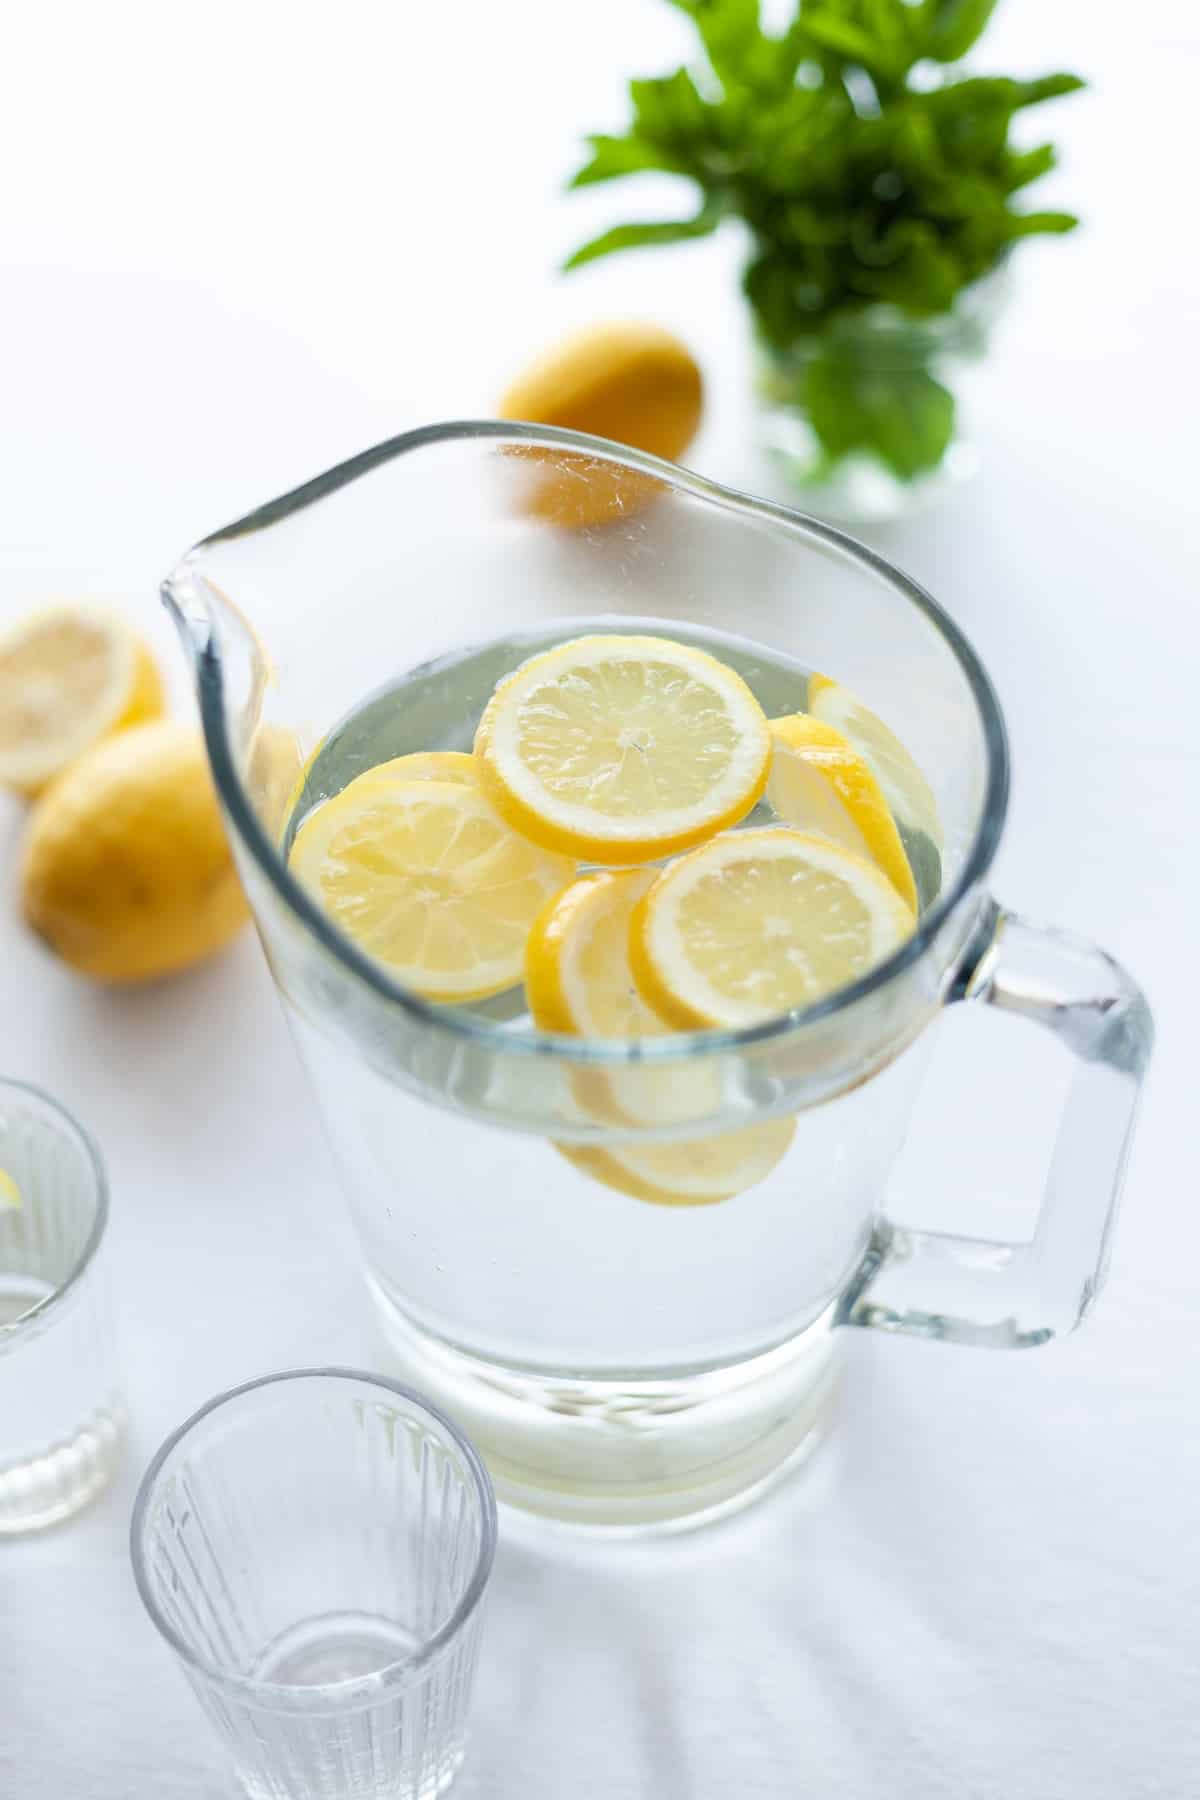 45 degree angle shot of clear glass pitcher filled with fruit water on a white table with halved lemons and a bunch of herbs in the background. photo credit julia zolotova.